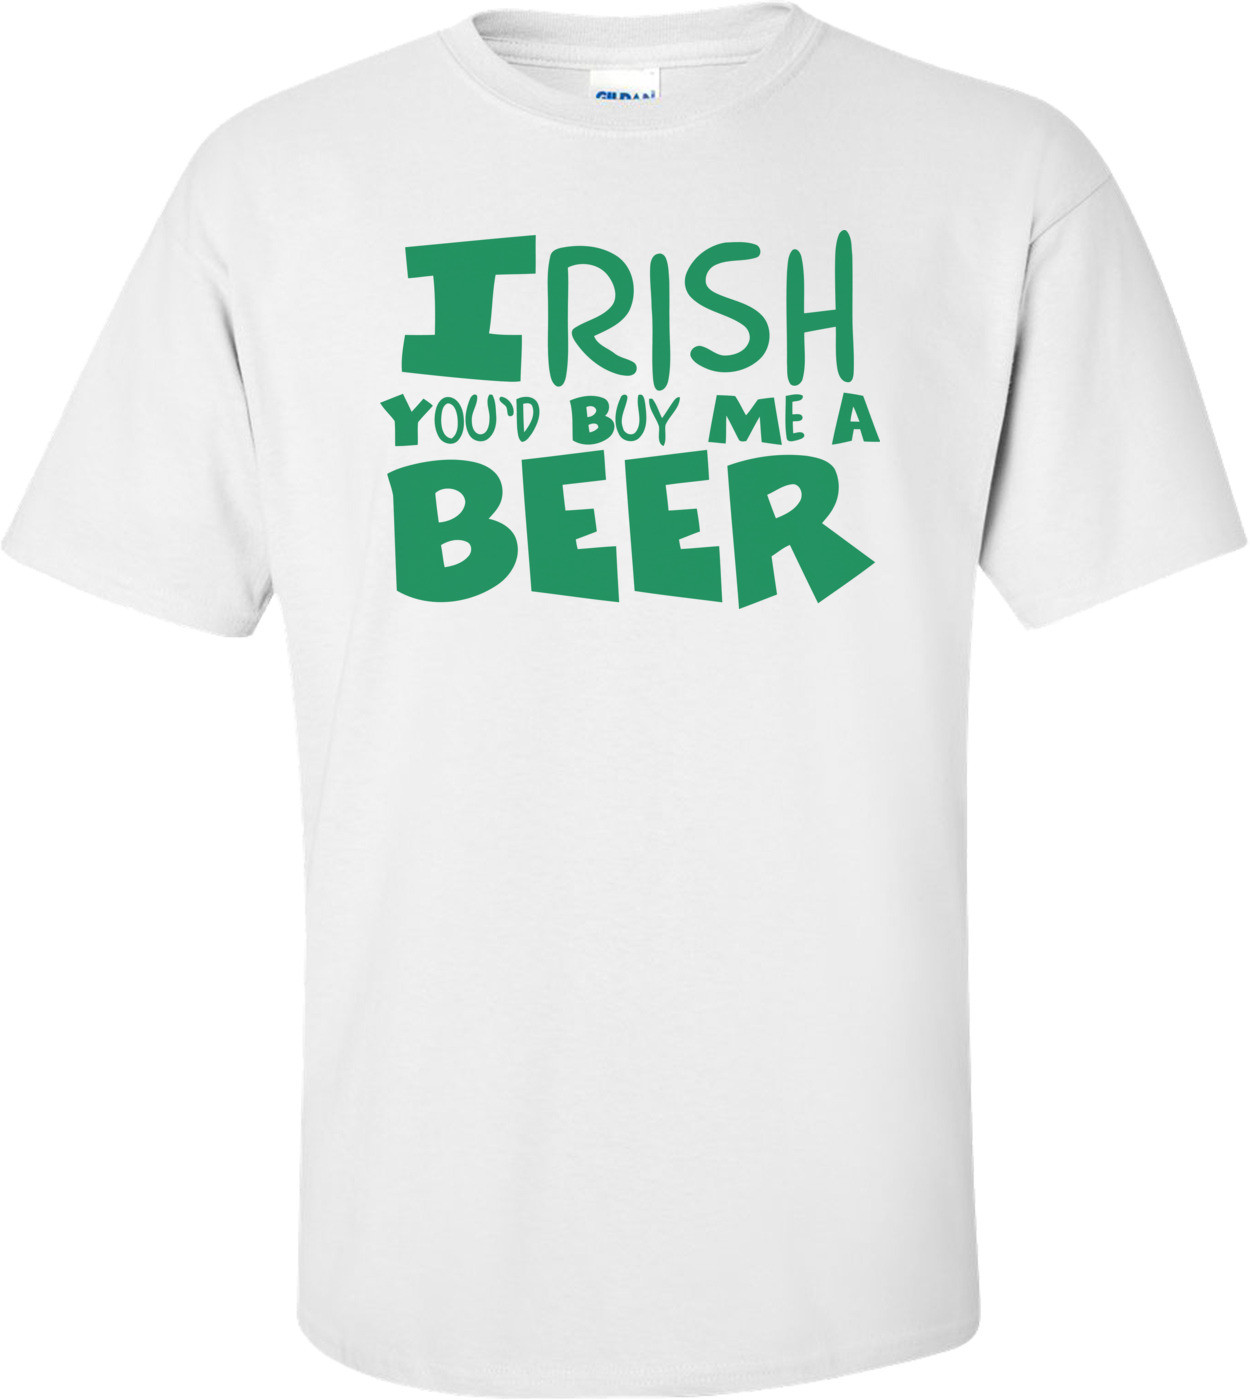 Irish You'd Buy Me A Beer St. Paddy's Day